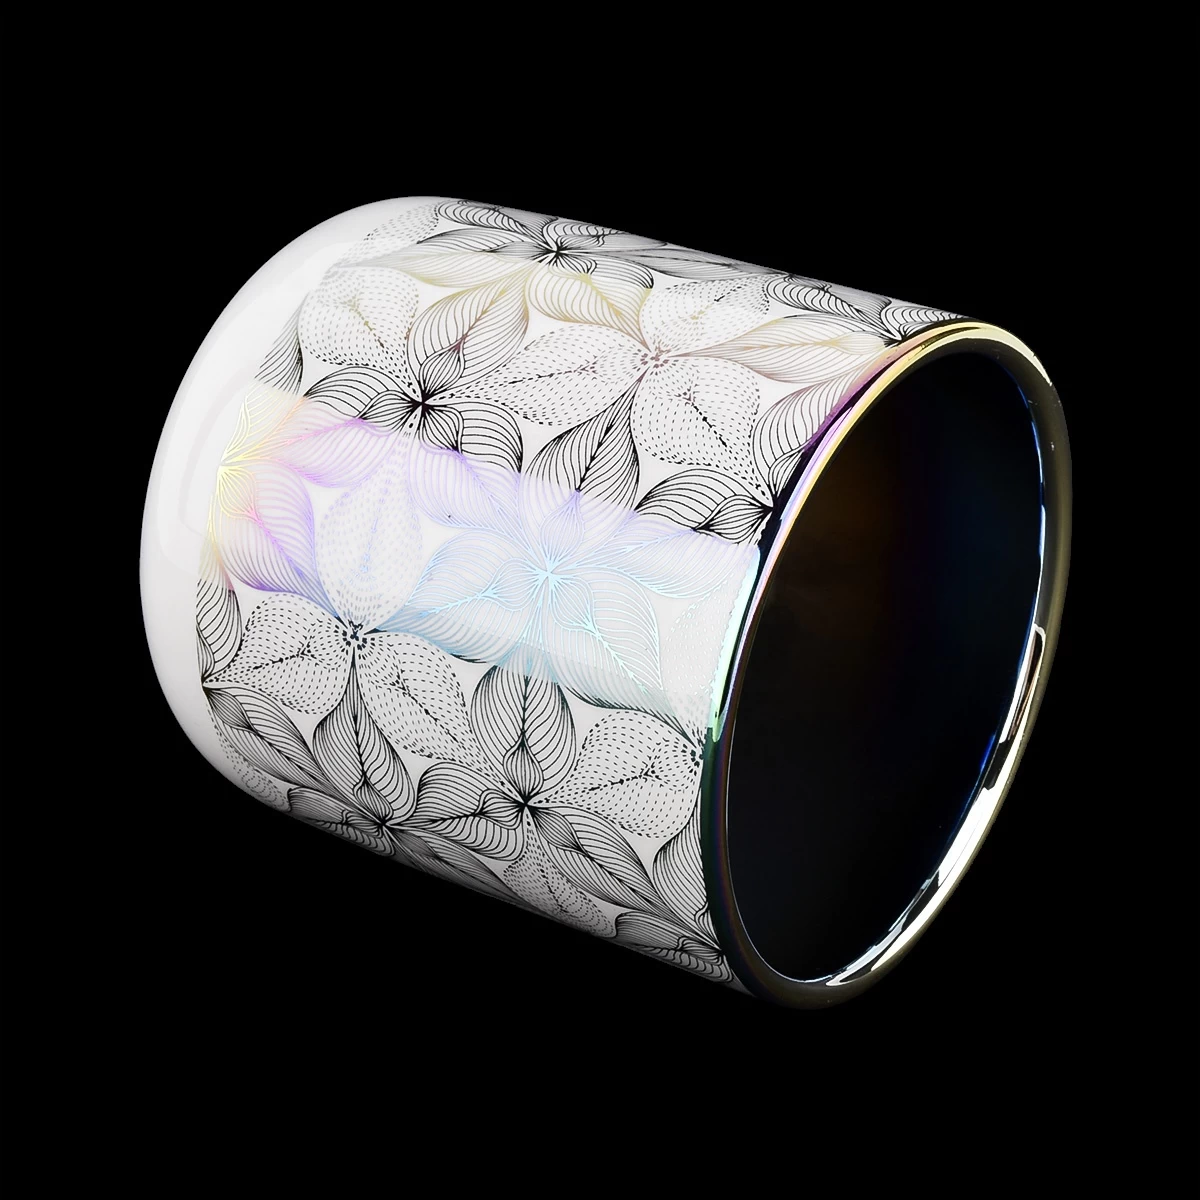 holographic ceramic candles container for soy wax